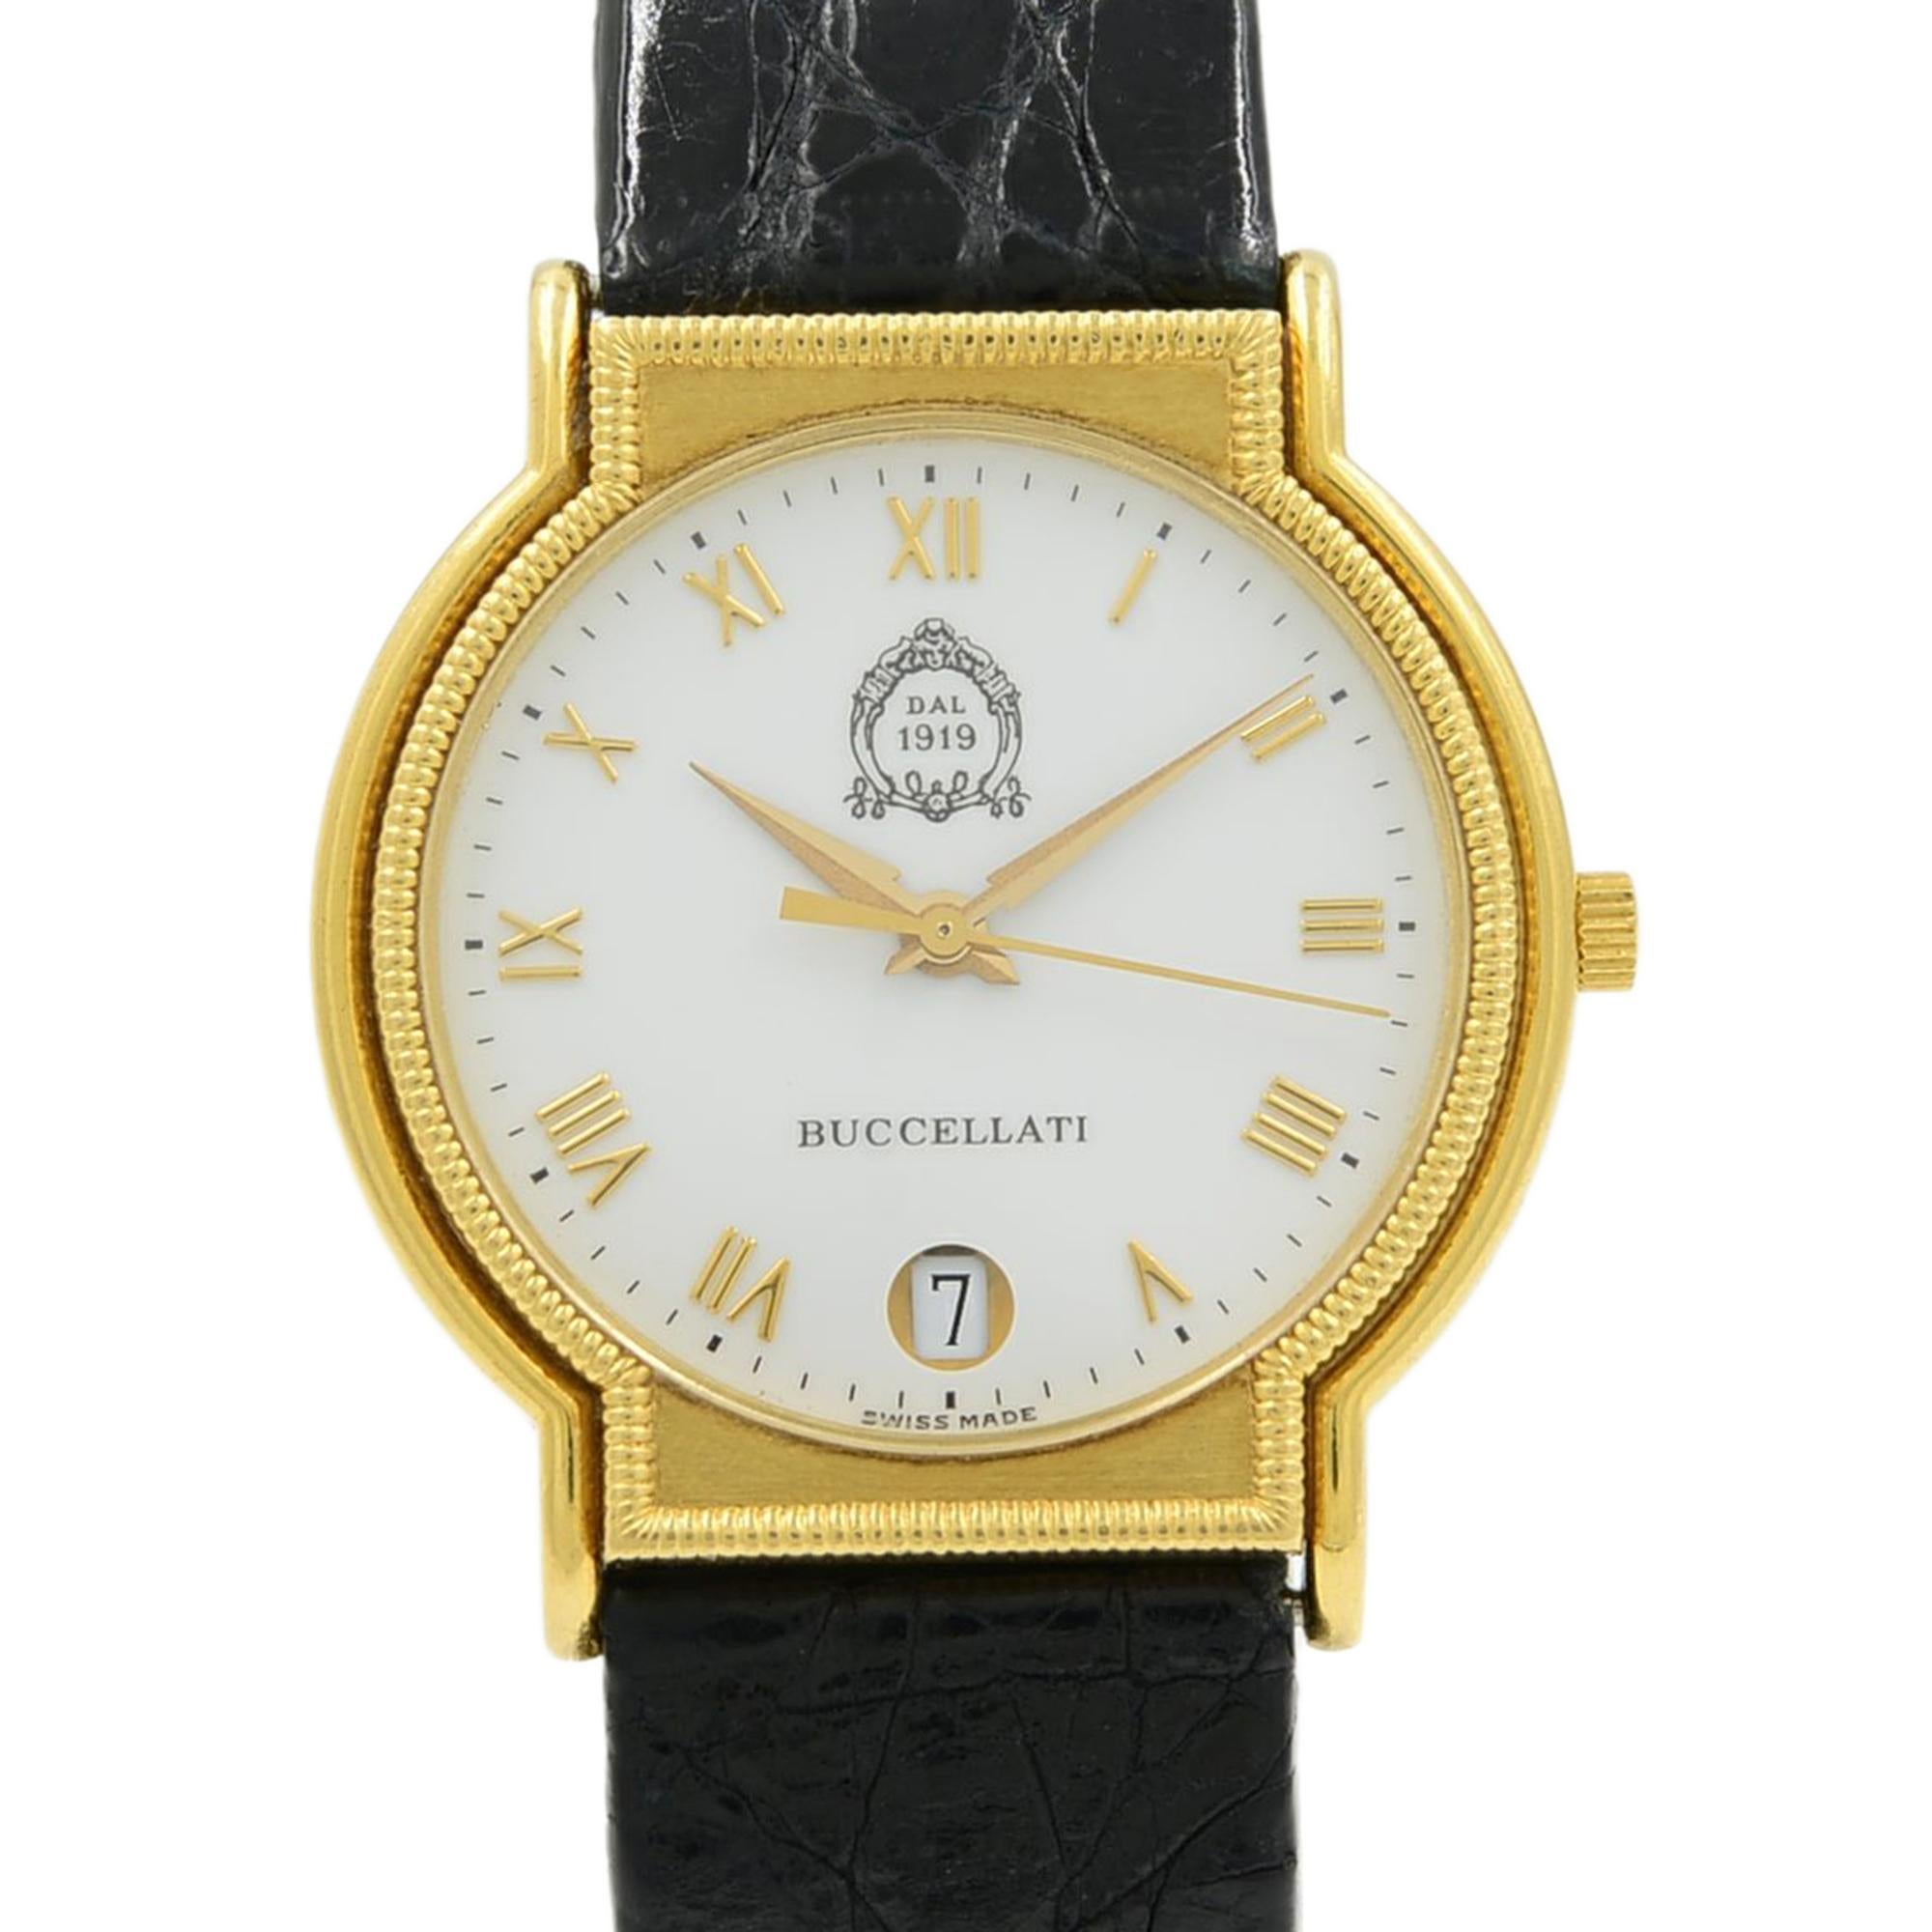 This pre-owned Buccellati Dal 1919 N/A is a beautiful Ladies timepiece that is powered by a quartz movement which is cased in a yellow gold case. It has a round shape face, date dial and has hand roman numerals style markers. It is completed with a